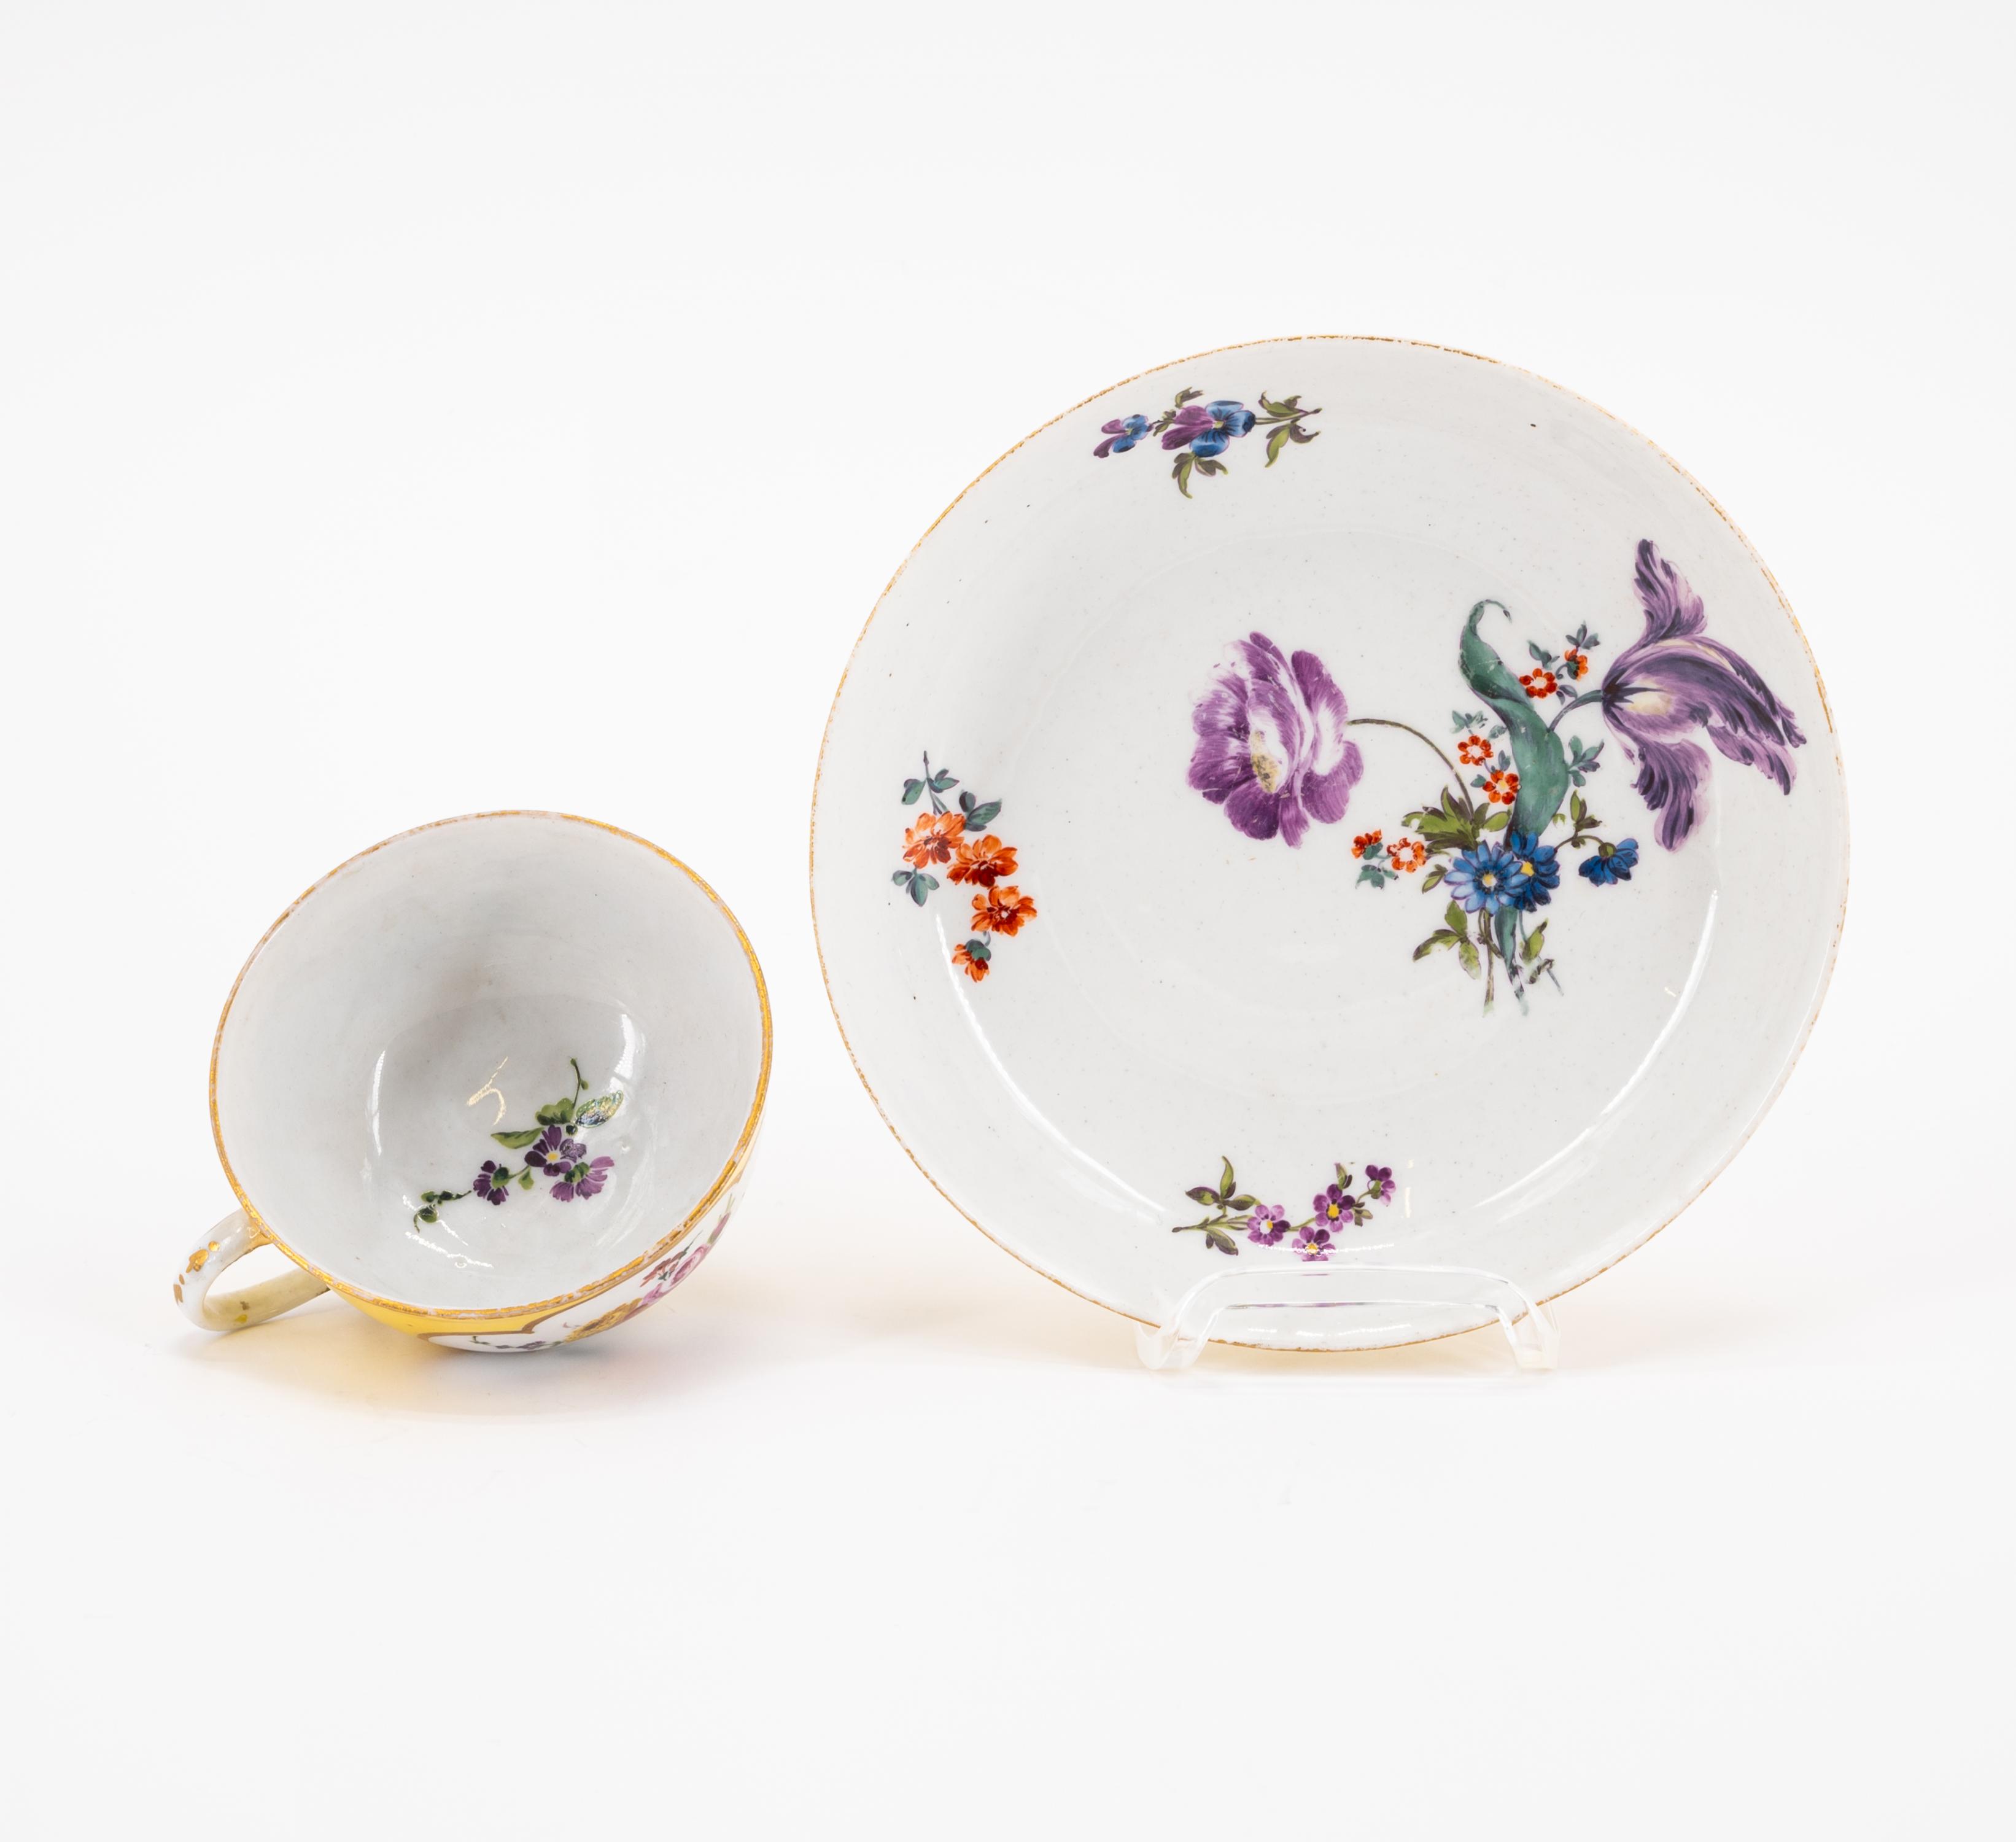 TWO PORCELAIN CUPS AND SAUCERS WITH YELLOW AND ORANGE COLOURED GROUND AS WELL AS FLORAL DECOR - Image 5 of 11